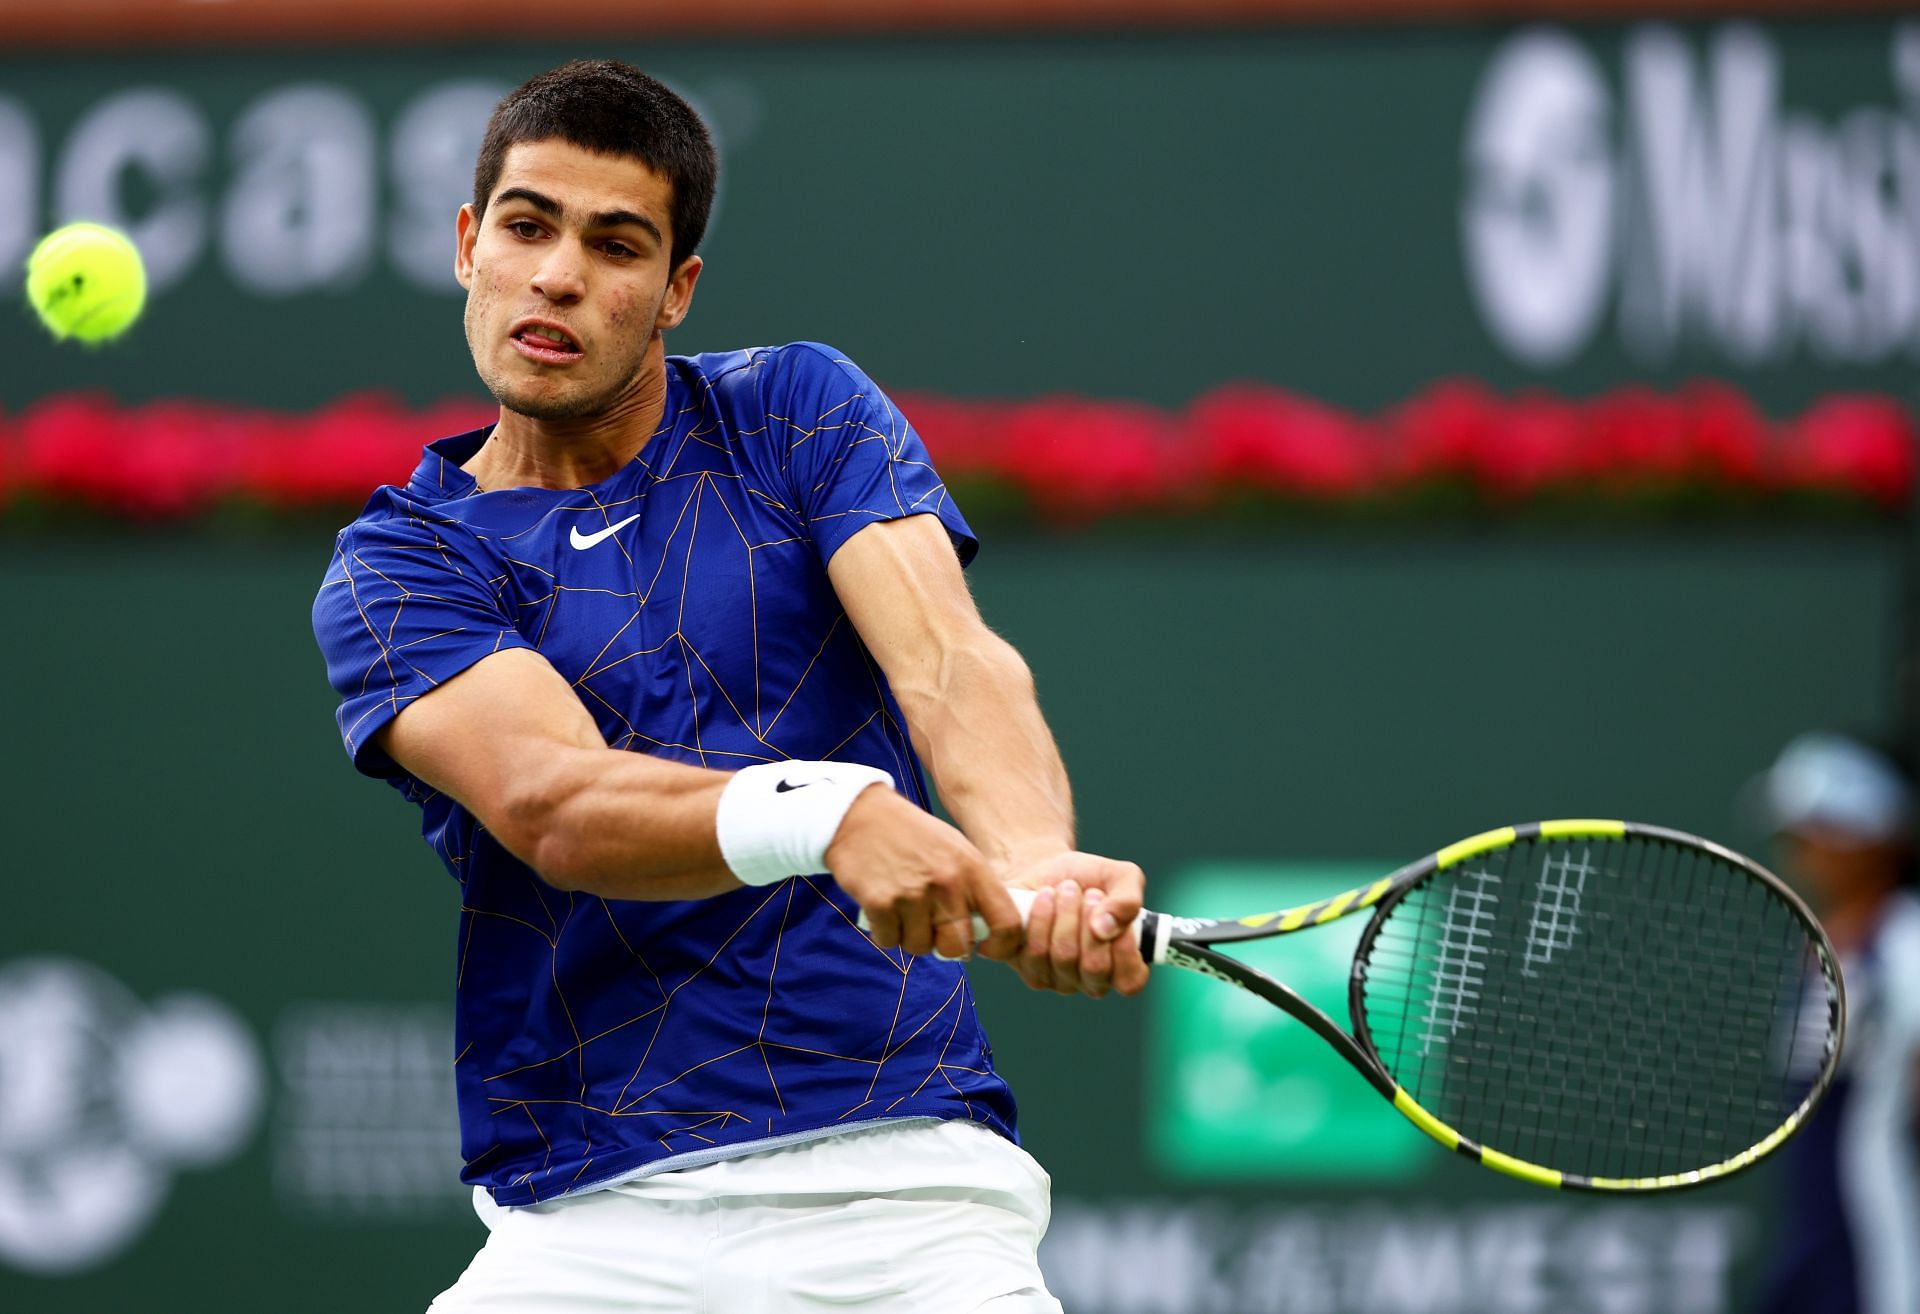 Alcaraz in action at Indian Wells